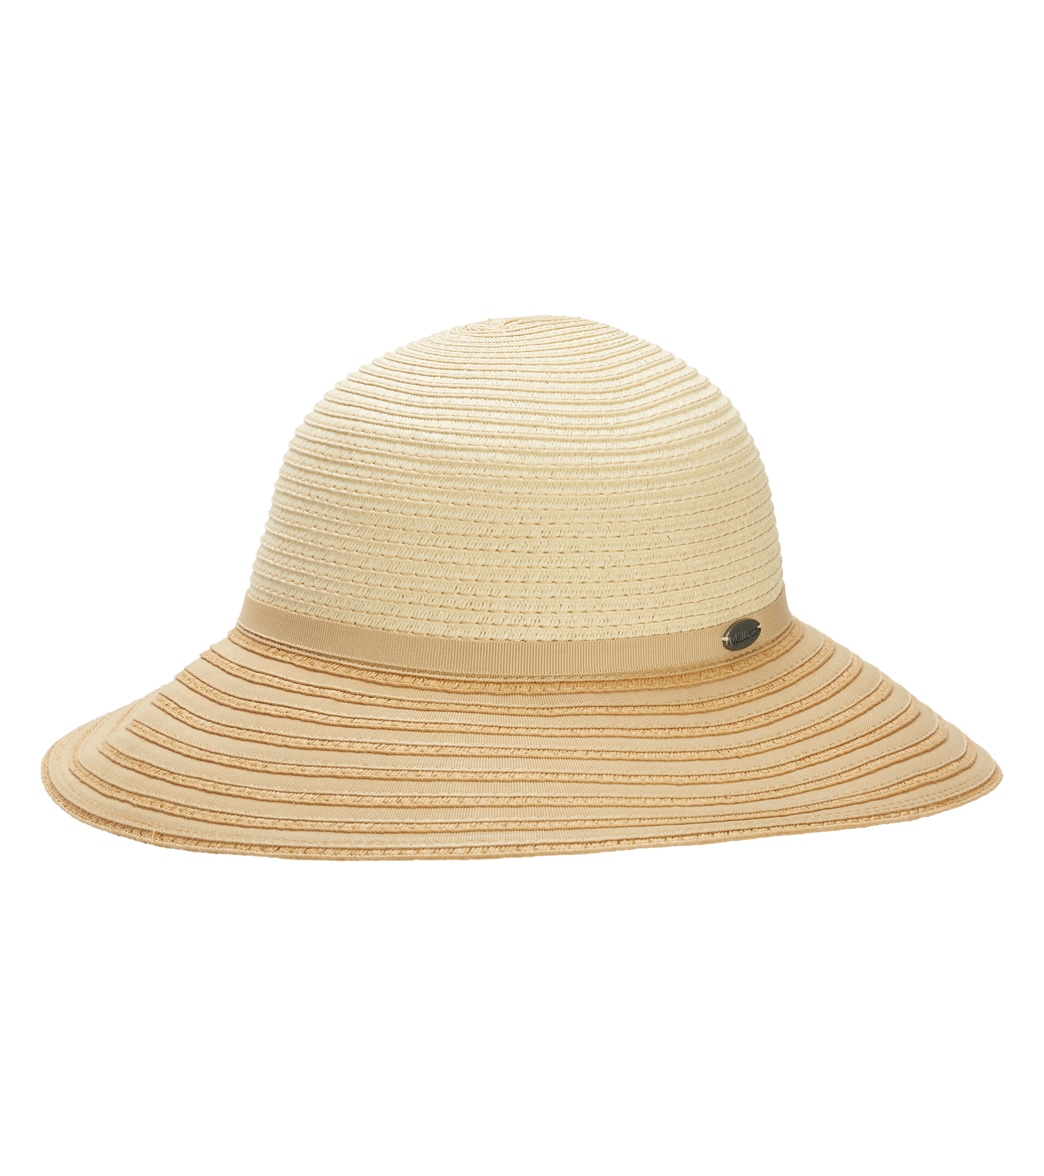 Wallaroo Women's Riviera Two Tone Paper Braid Hat - Natural/Tan One Size Polyester - Swimoutlet.com